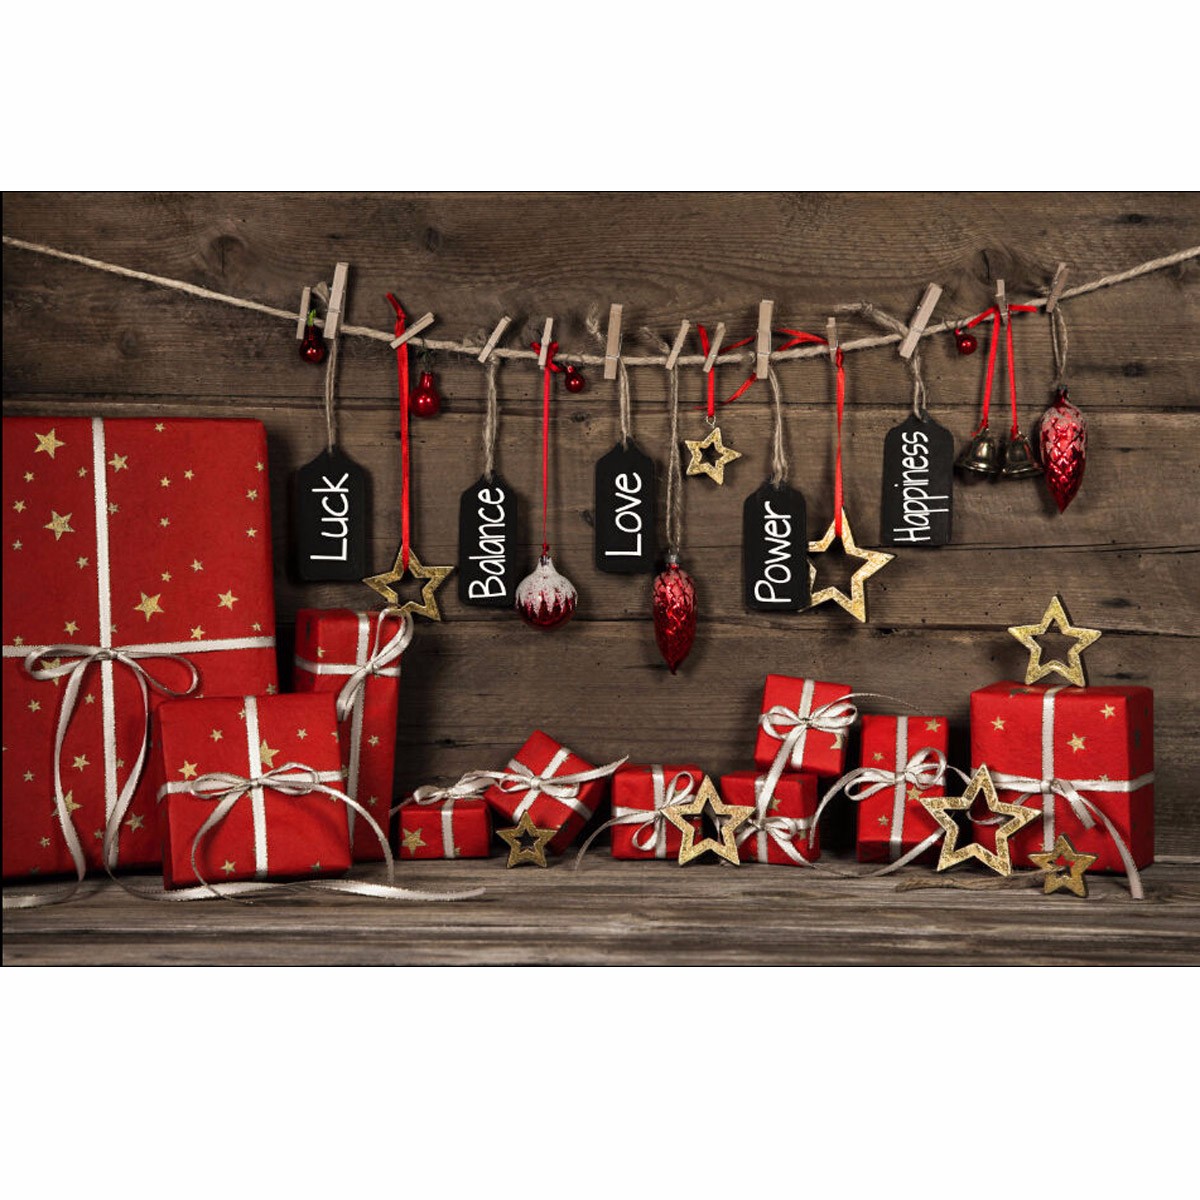 90x150cm3x5ft-Wooden-Gift-Box-Christmas-Background-Vinyl-Fabric-Photography-1130349-2